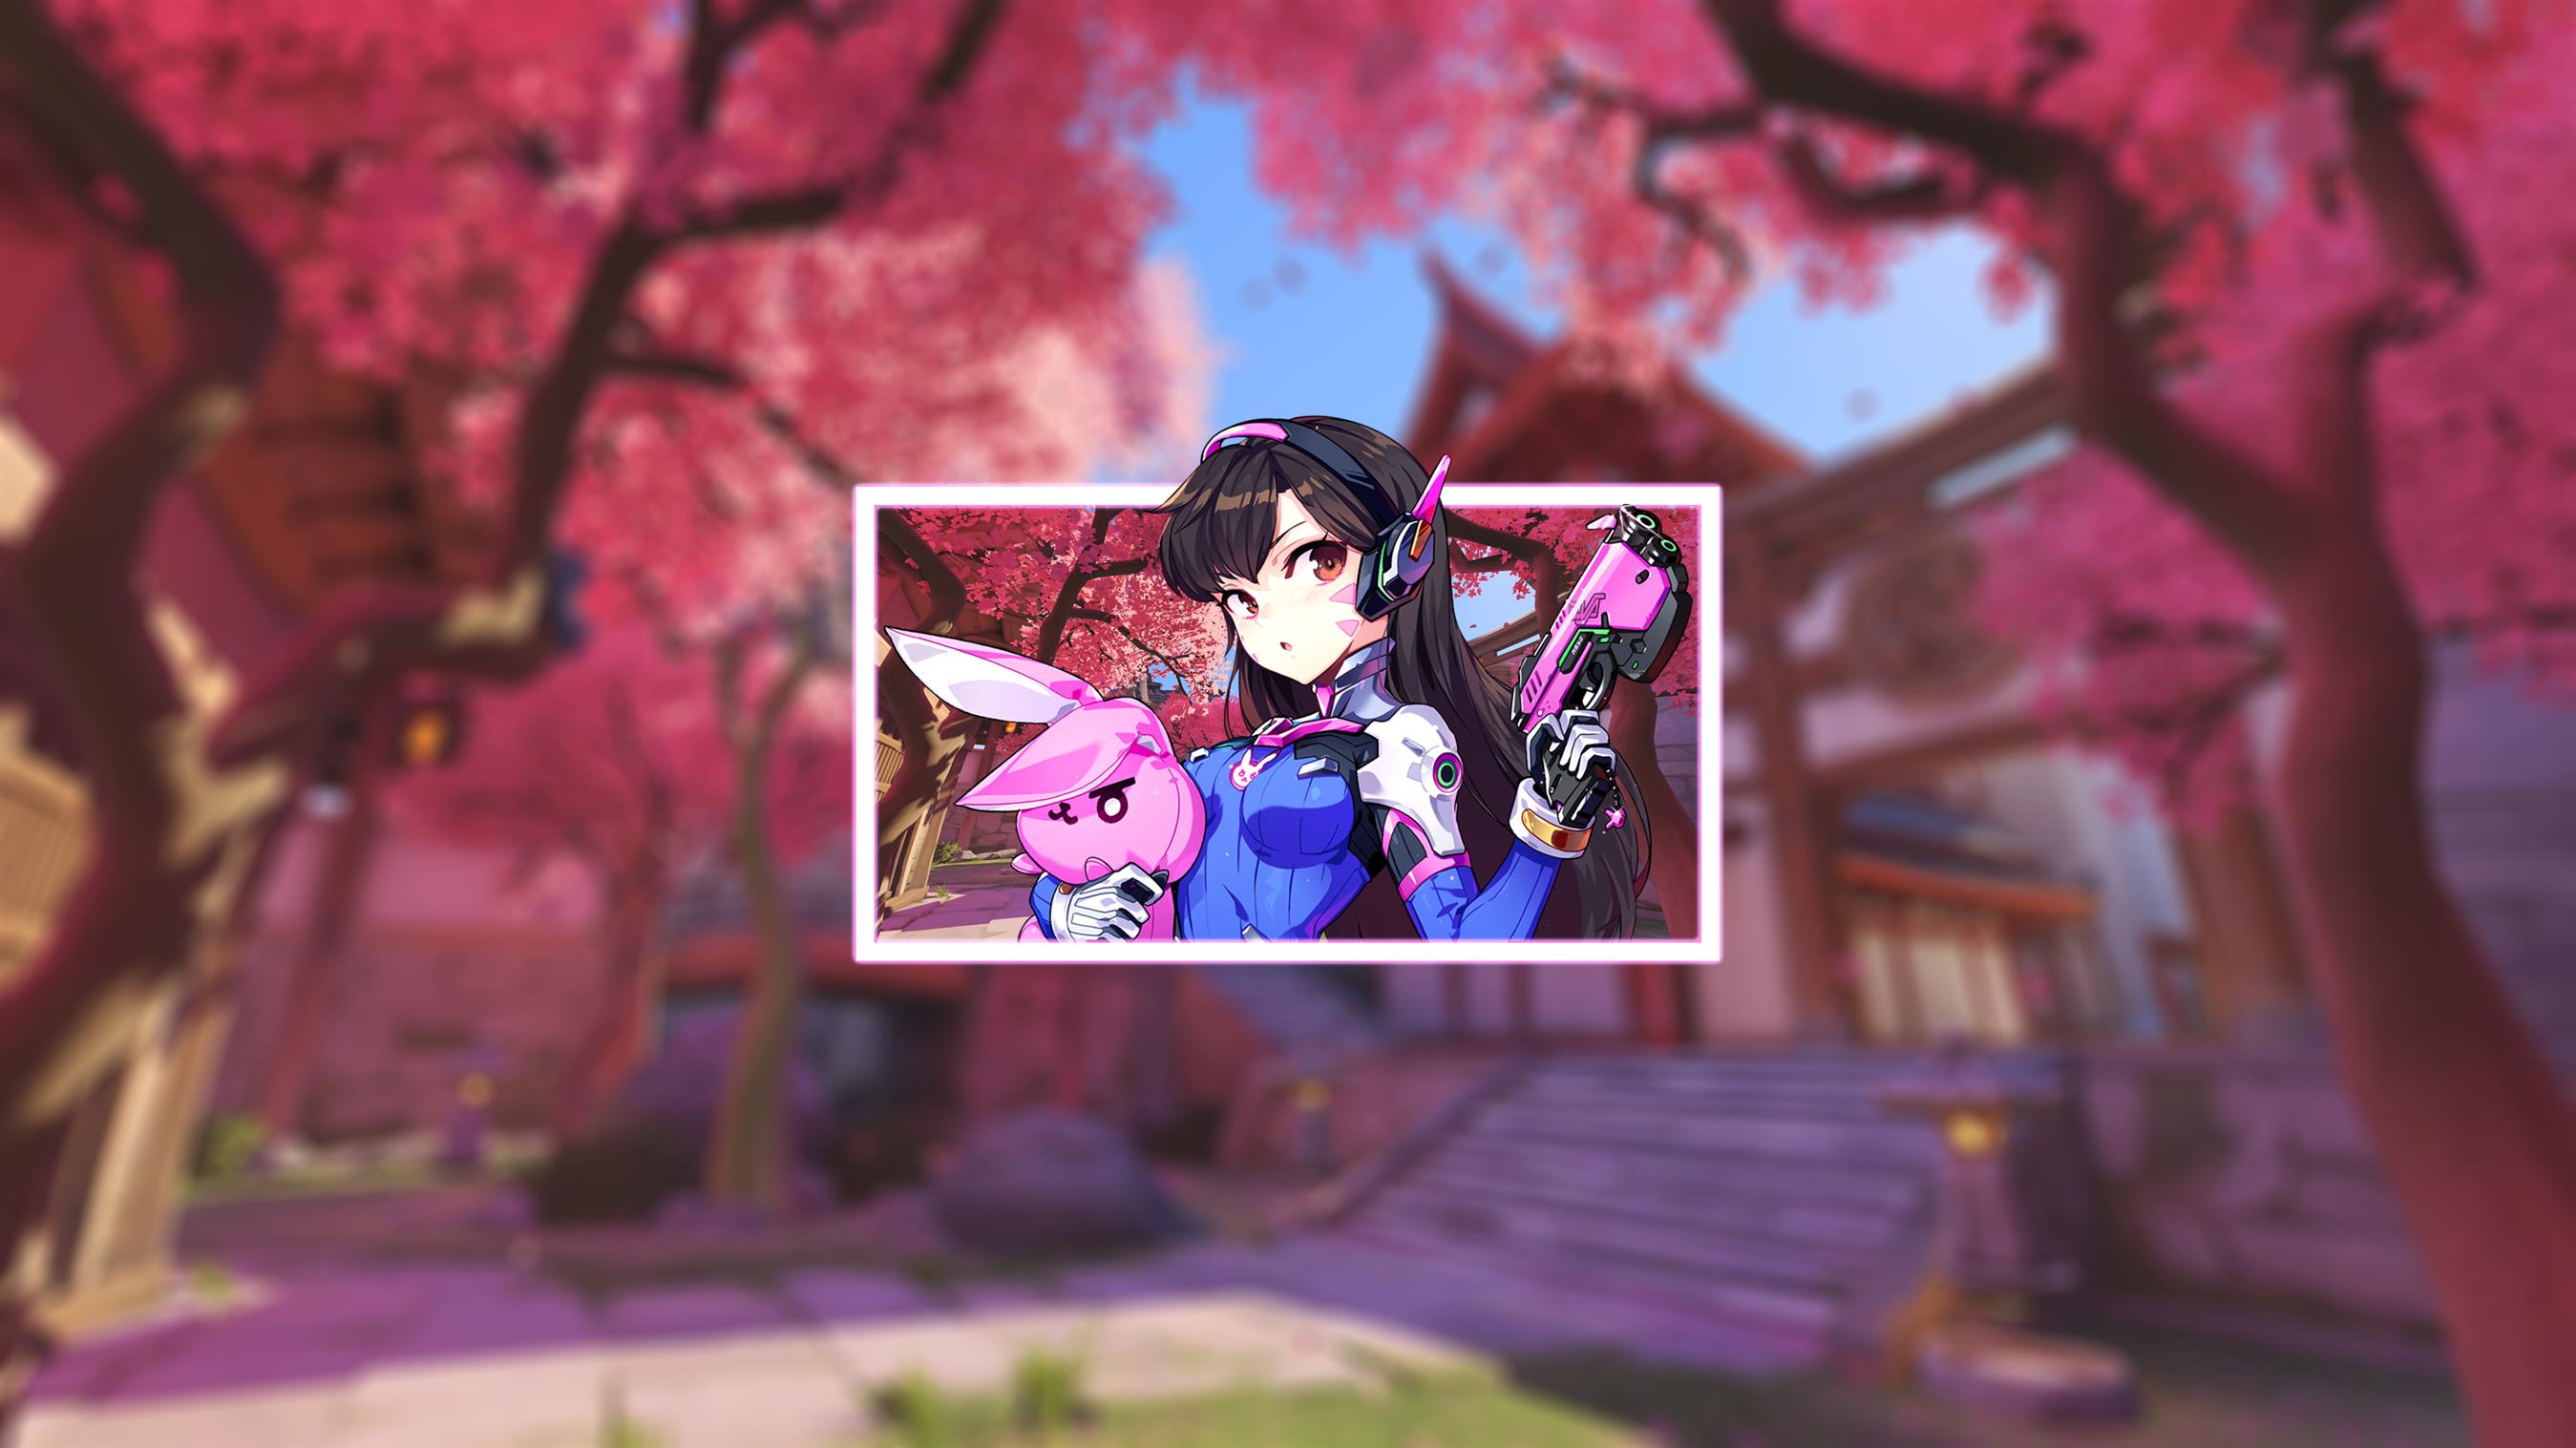 Anime 2698x1517 D.Va (Overwatch) anime girls Overwatch picture-in-picture